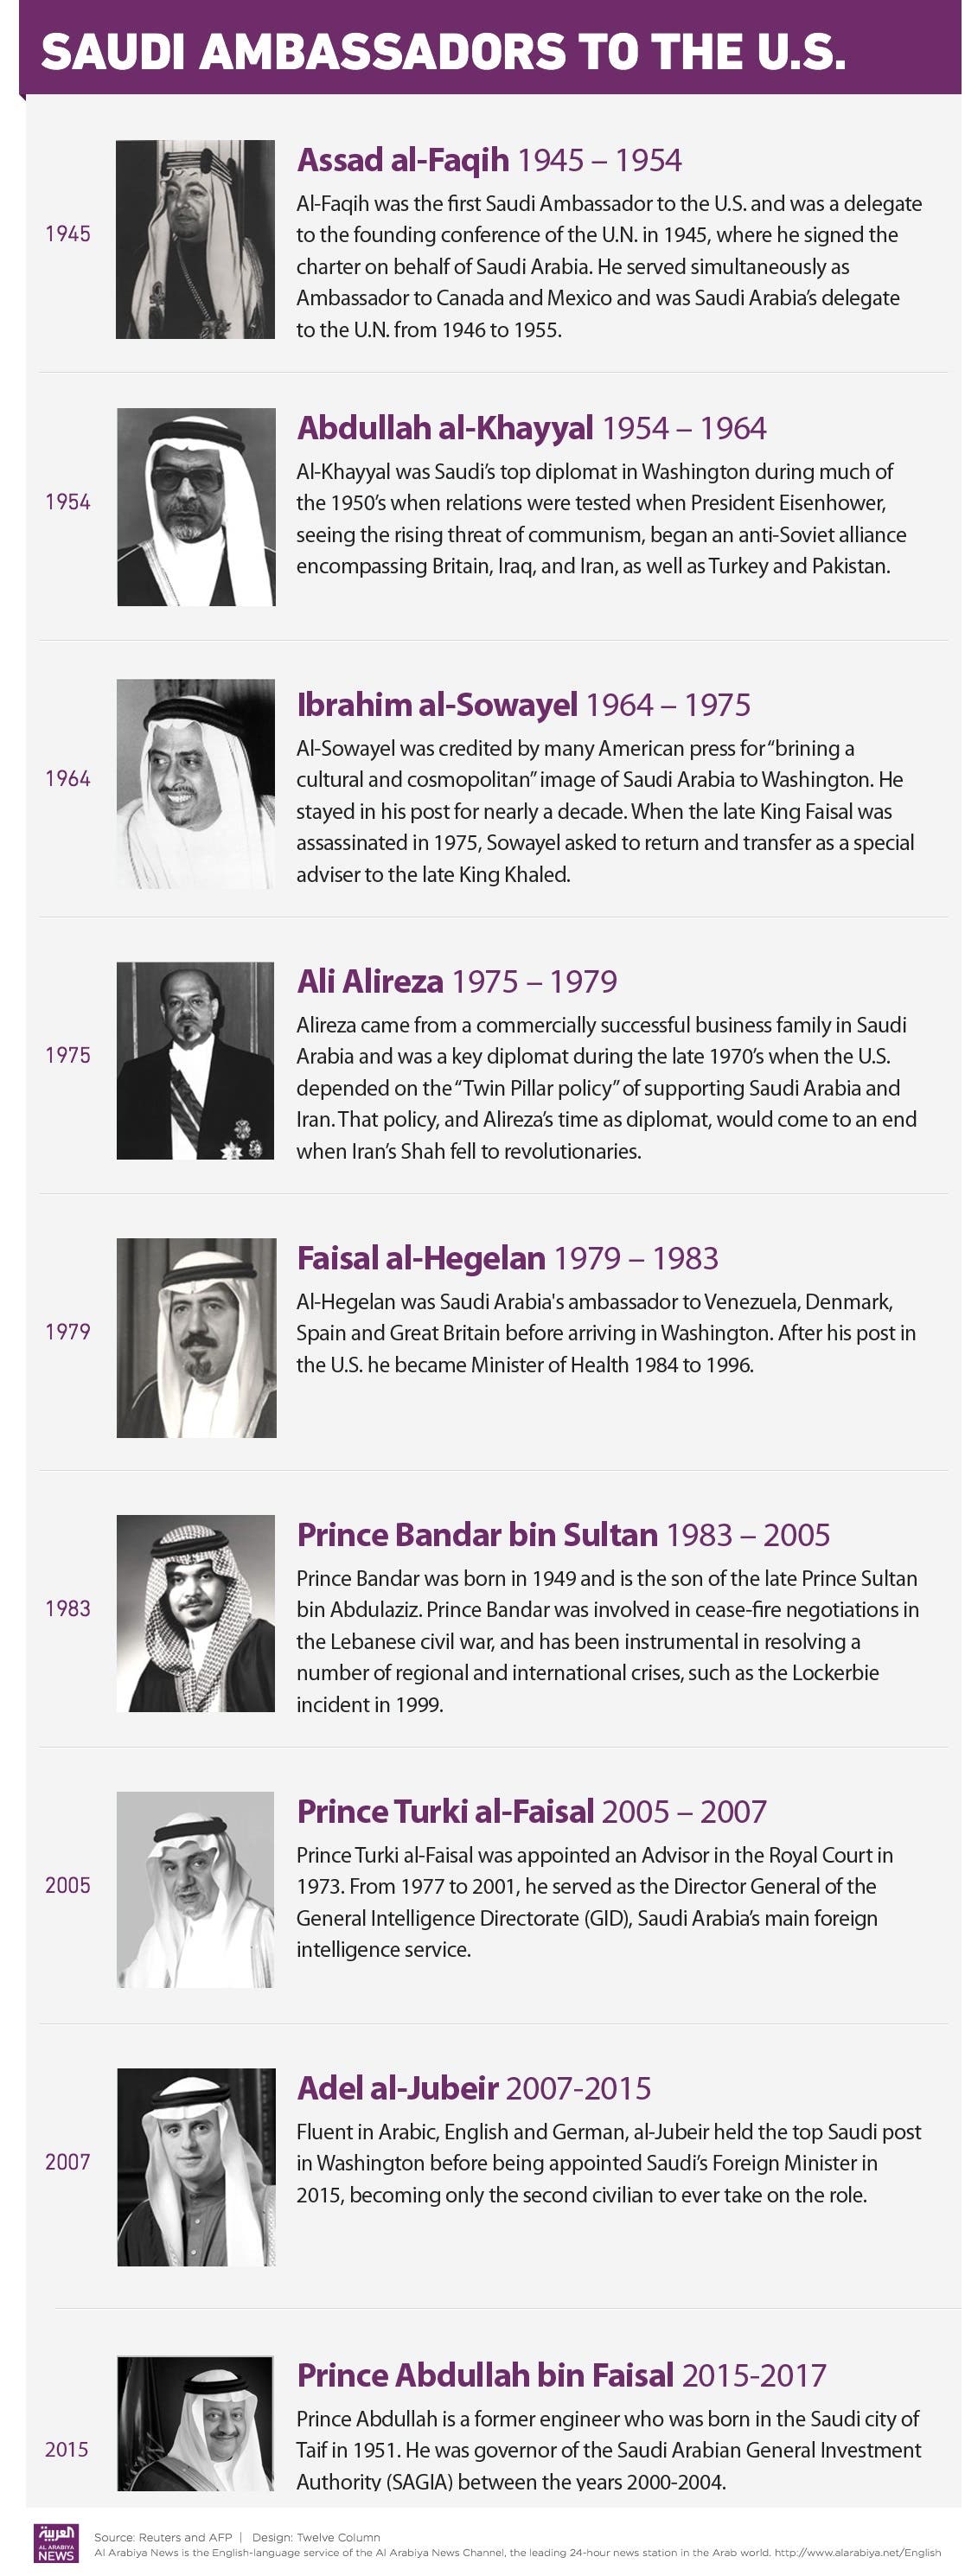 INFOGRAPHIC: Saudi ambassadors to the US throughout history